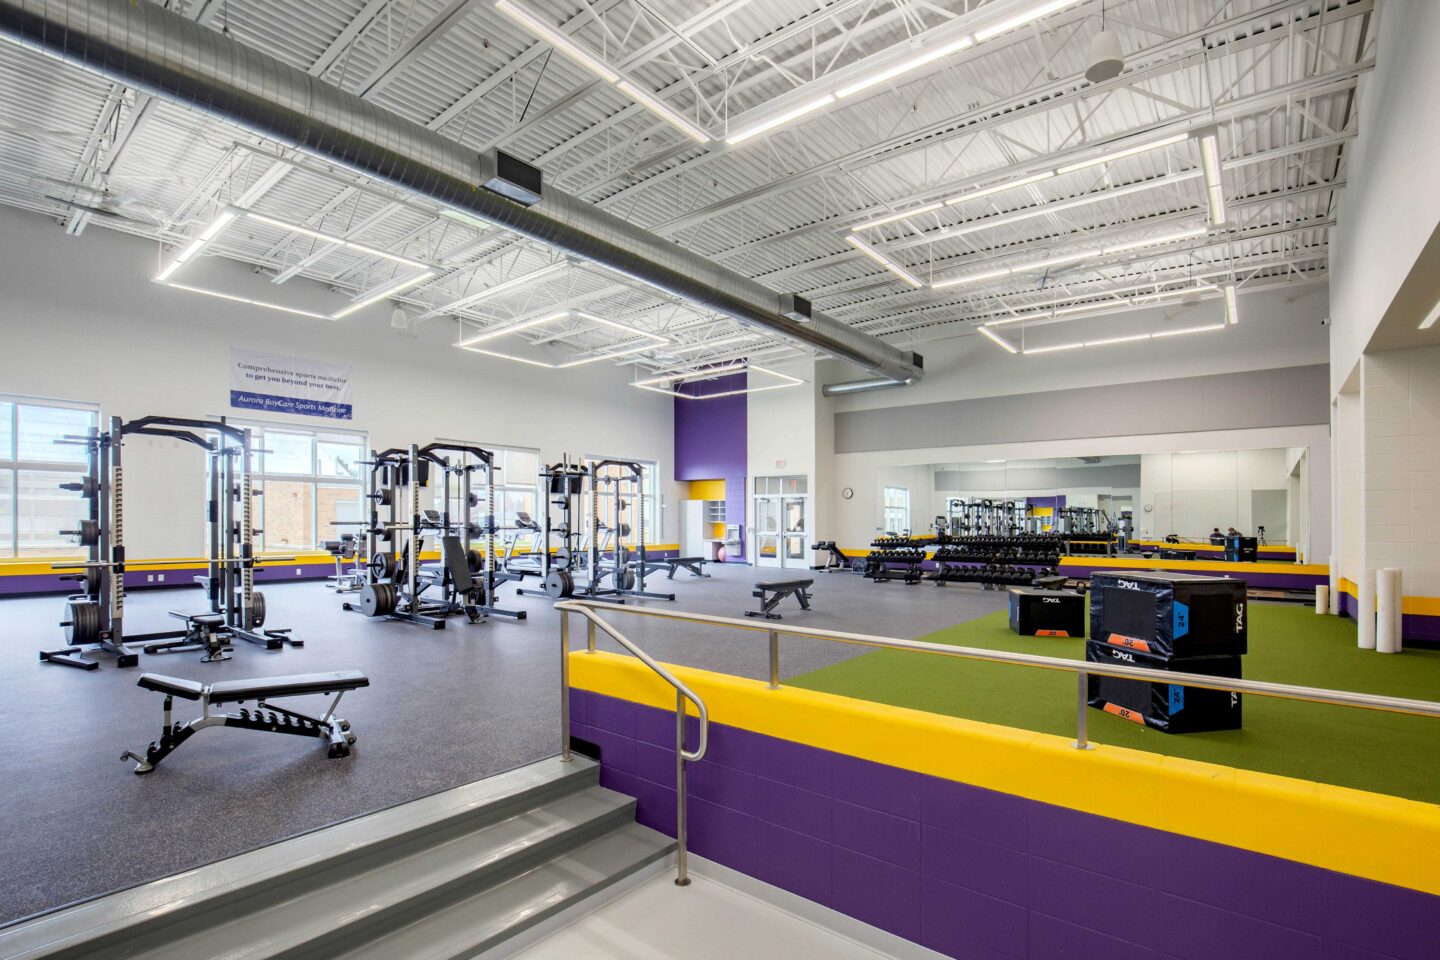 A view of the weight-lifting machines in the new fitness center